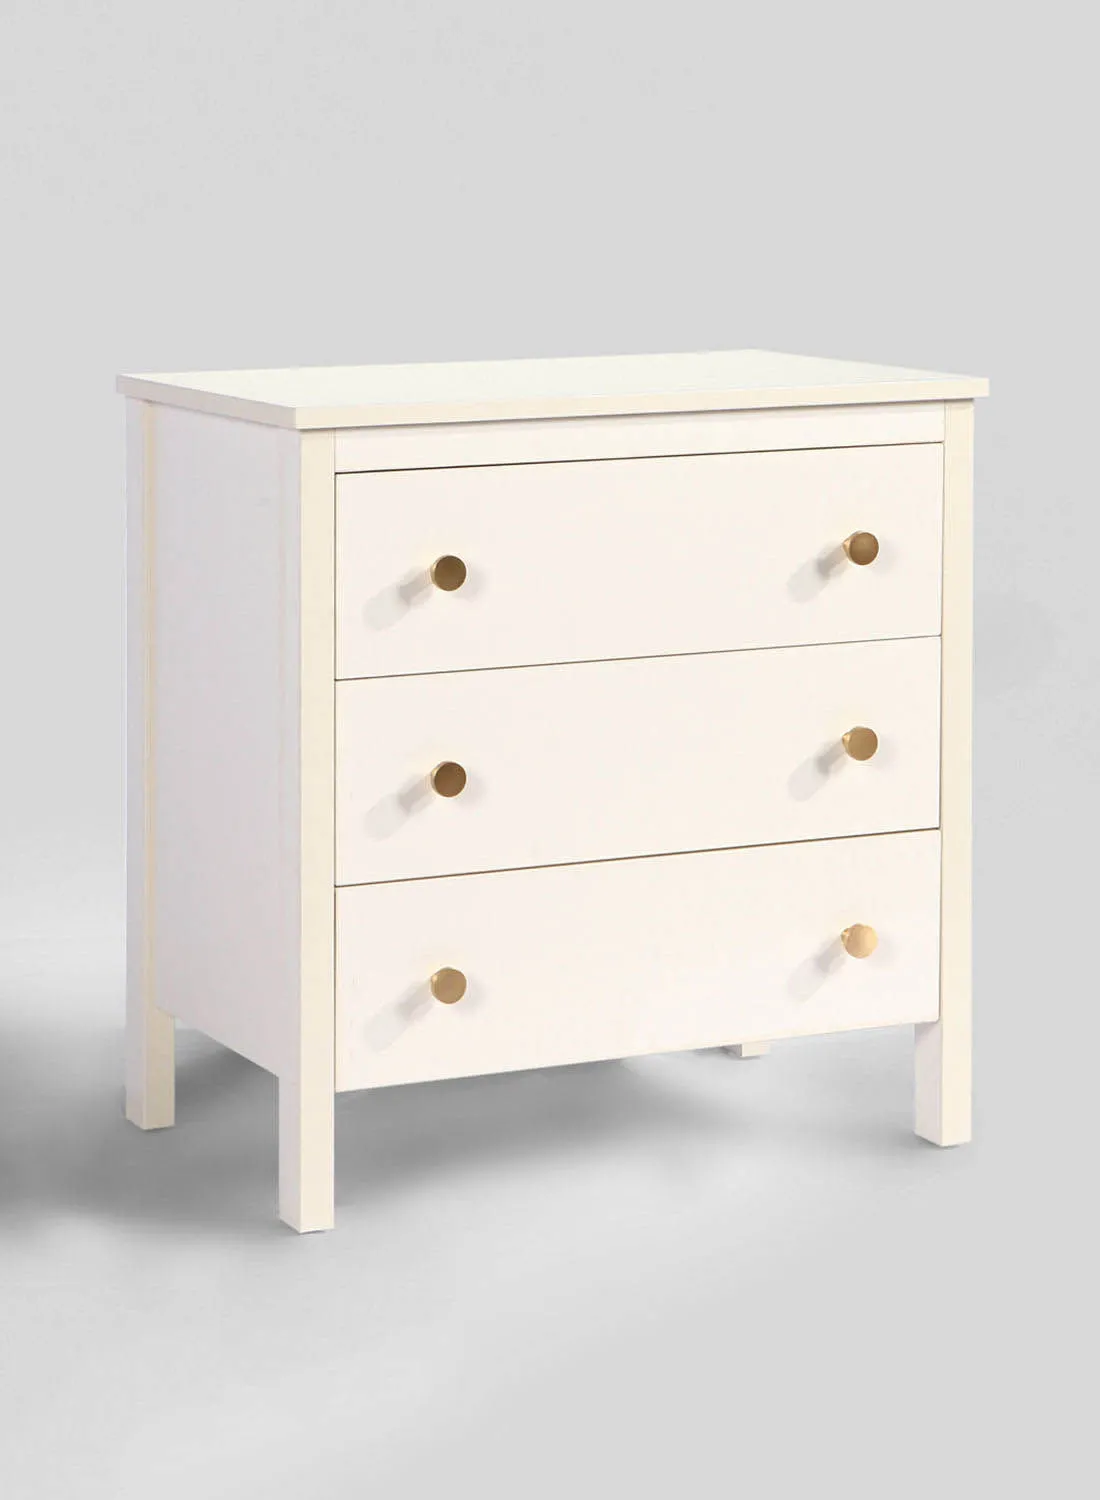 Switch Bedroom Makeup Vanity - White Frigg Collection 700 X 450 X 720 - 3 Drawer Dresser For Hairstyle